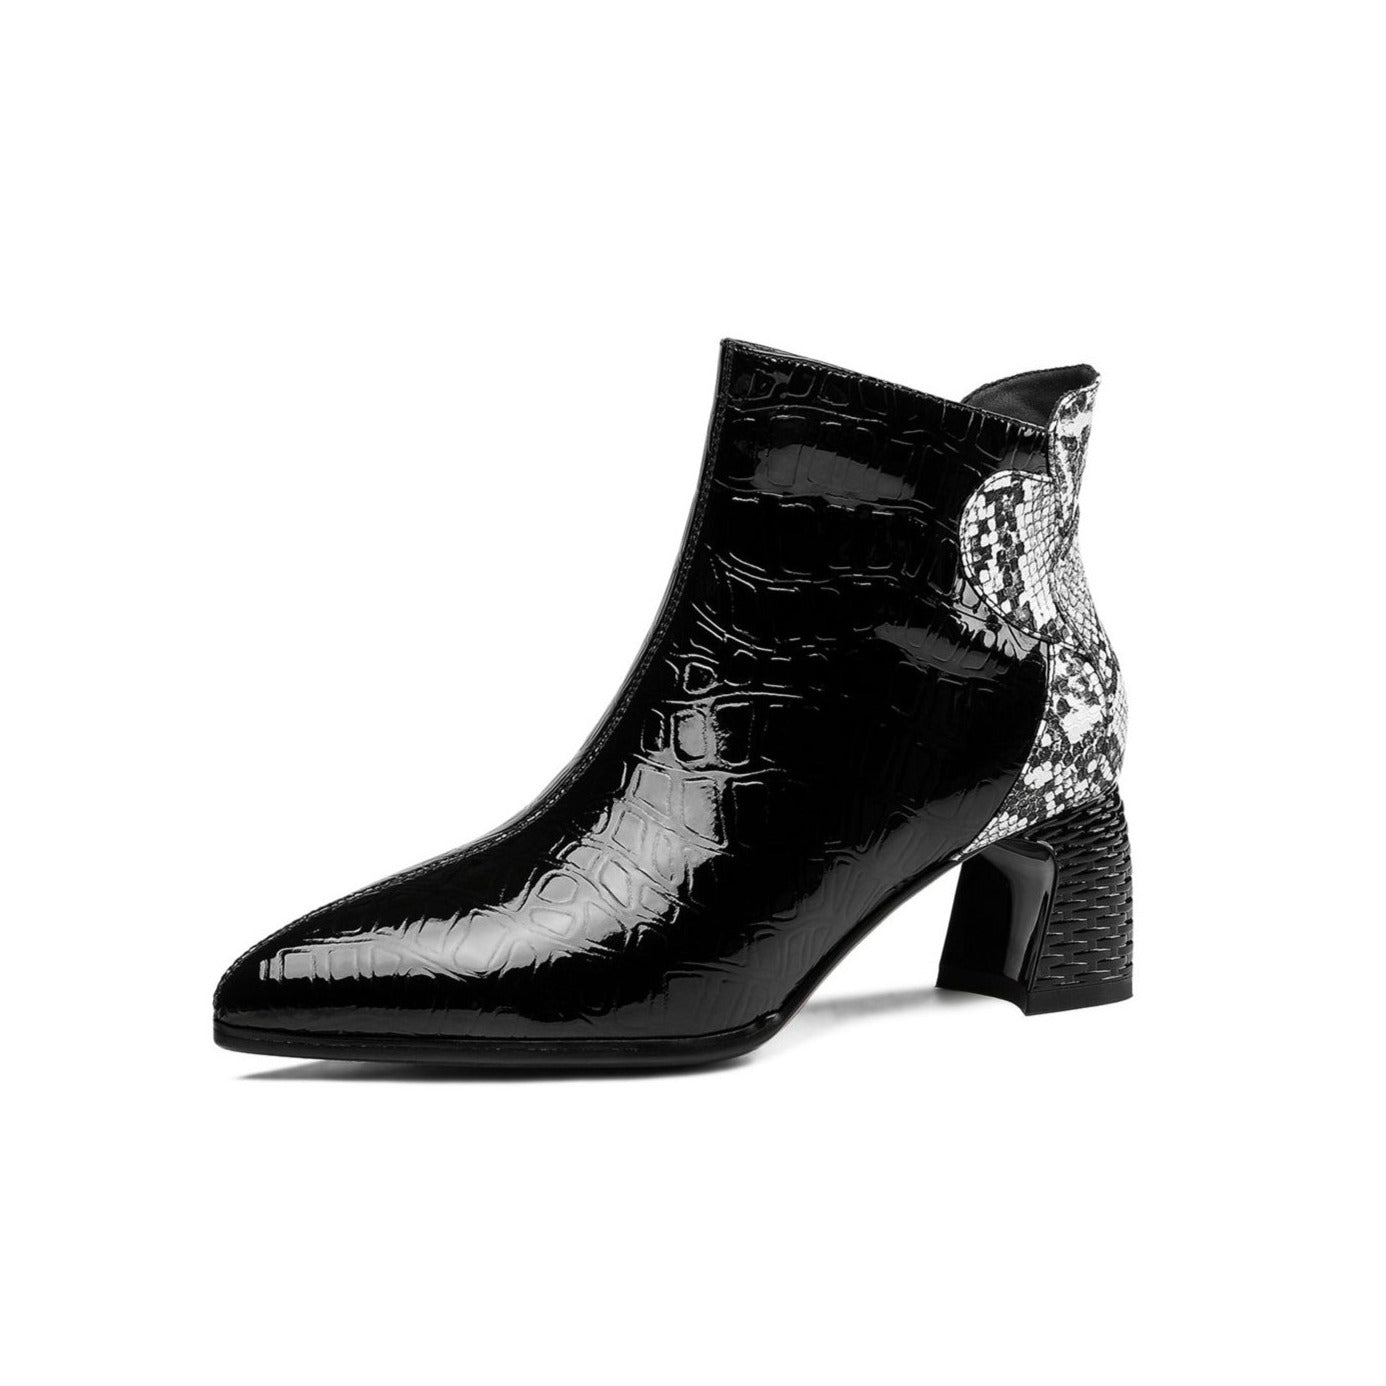 TinaCus Handmade Women's Patent Leather Patchwork Color Snakeskin Pointed Toe Side Zipper Mid Block Heel Ankle Boots Shoes